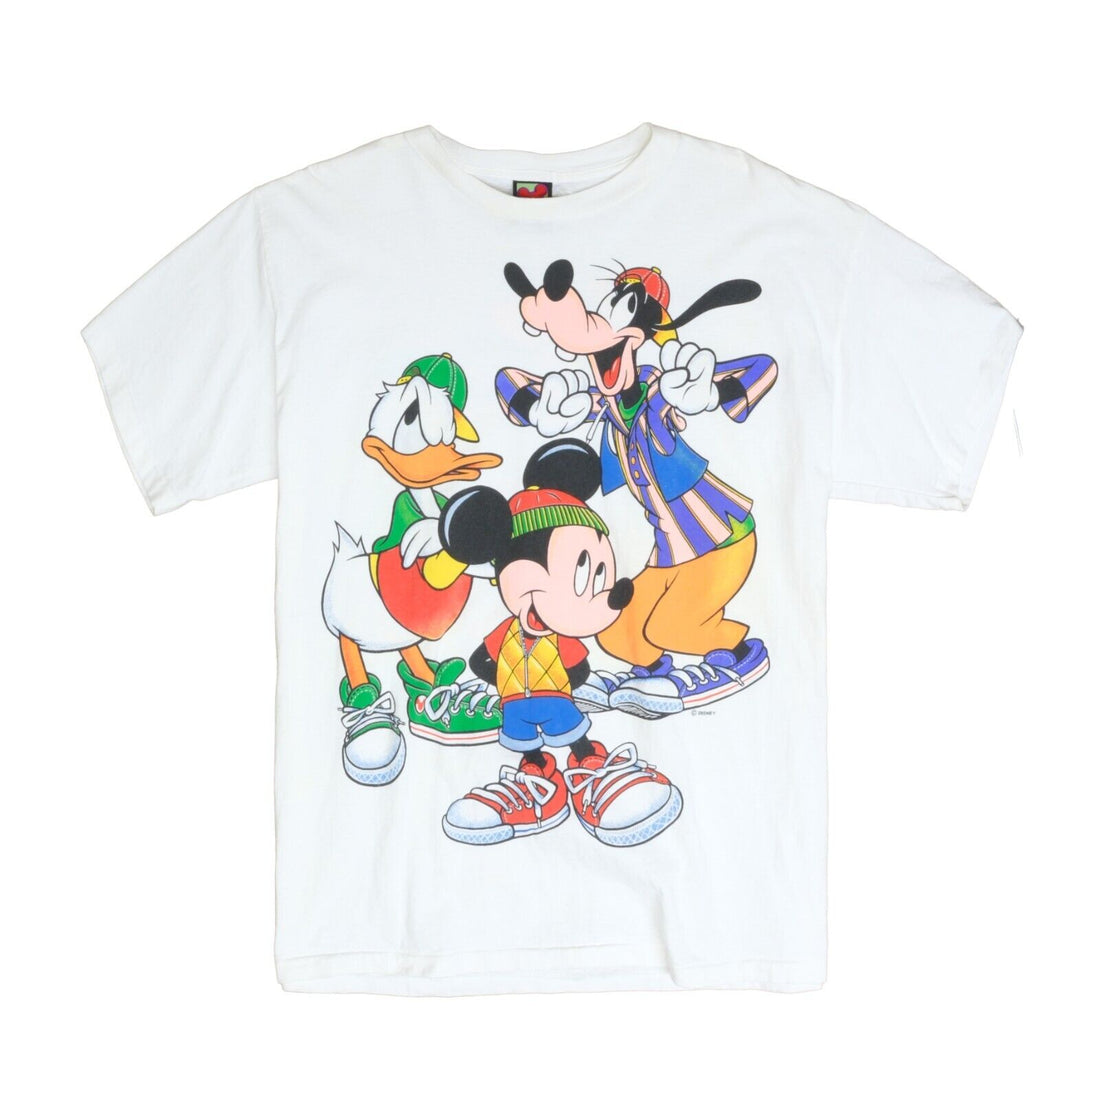 Vintage Mickey Mouse Disney T-Shirt Large Donald Duck Goofy